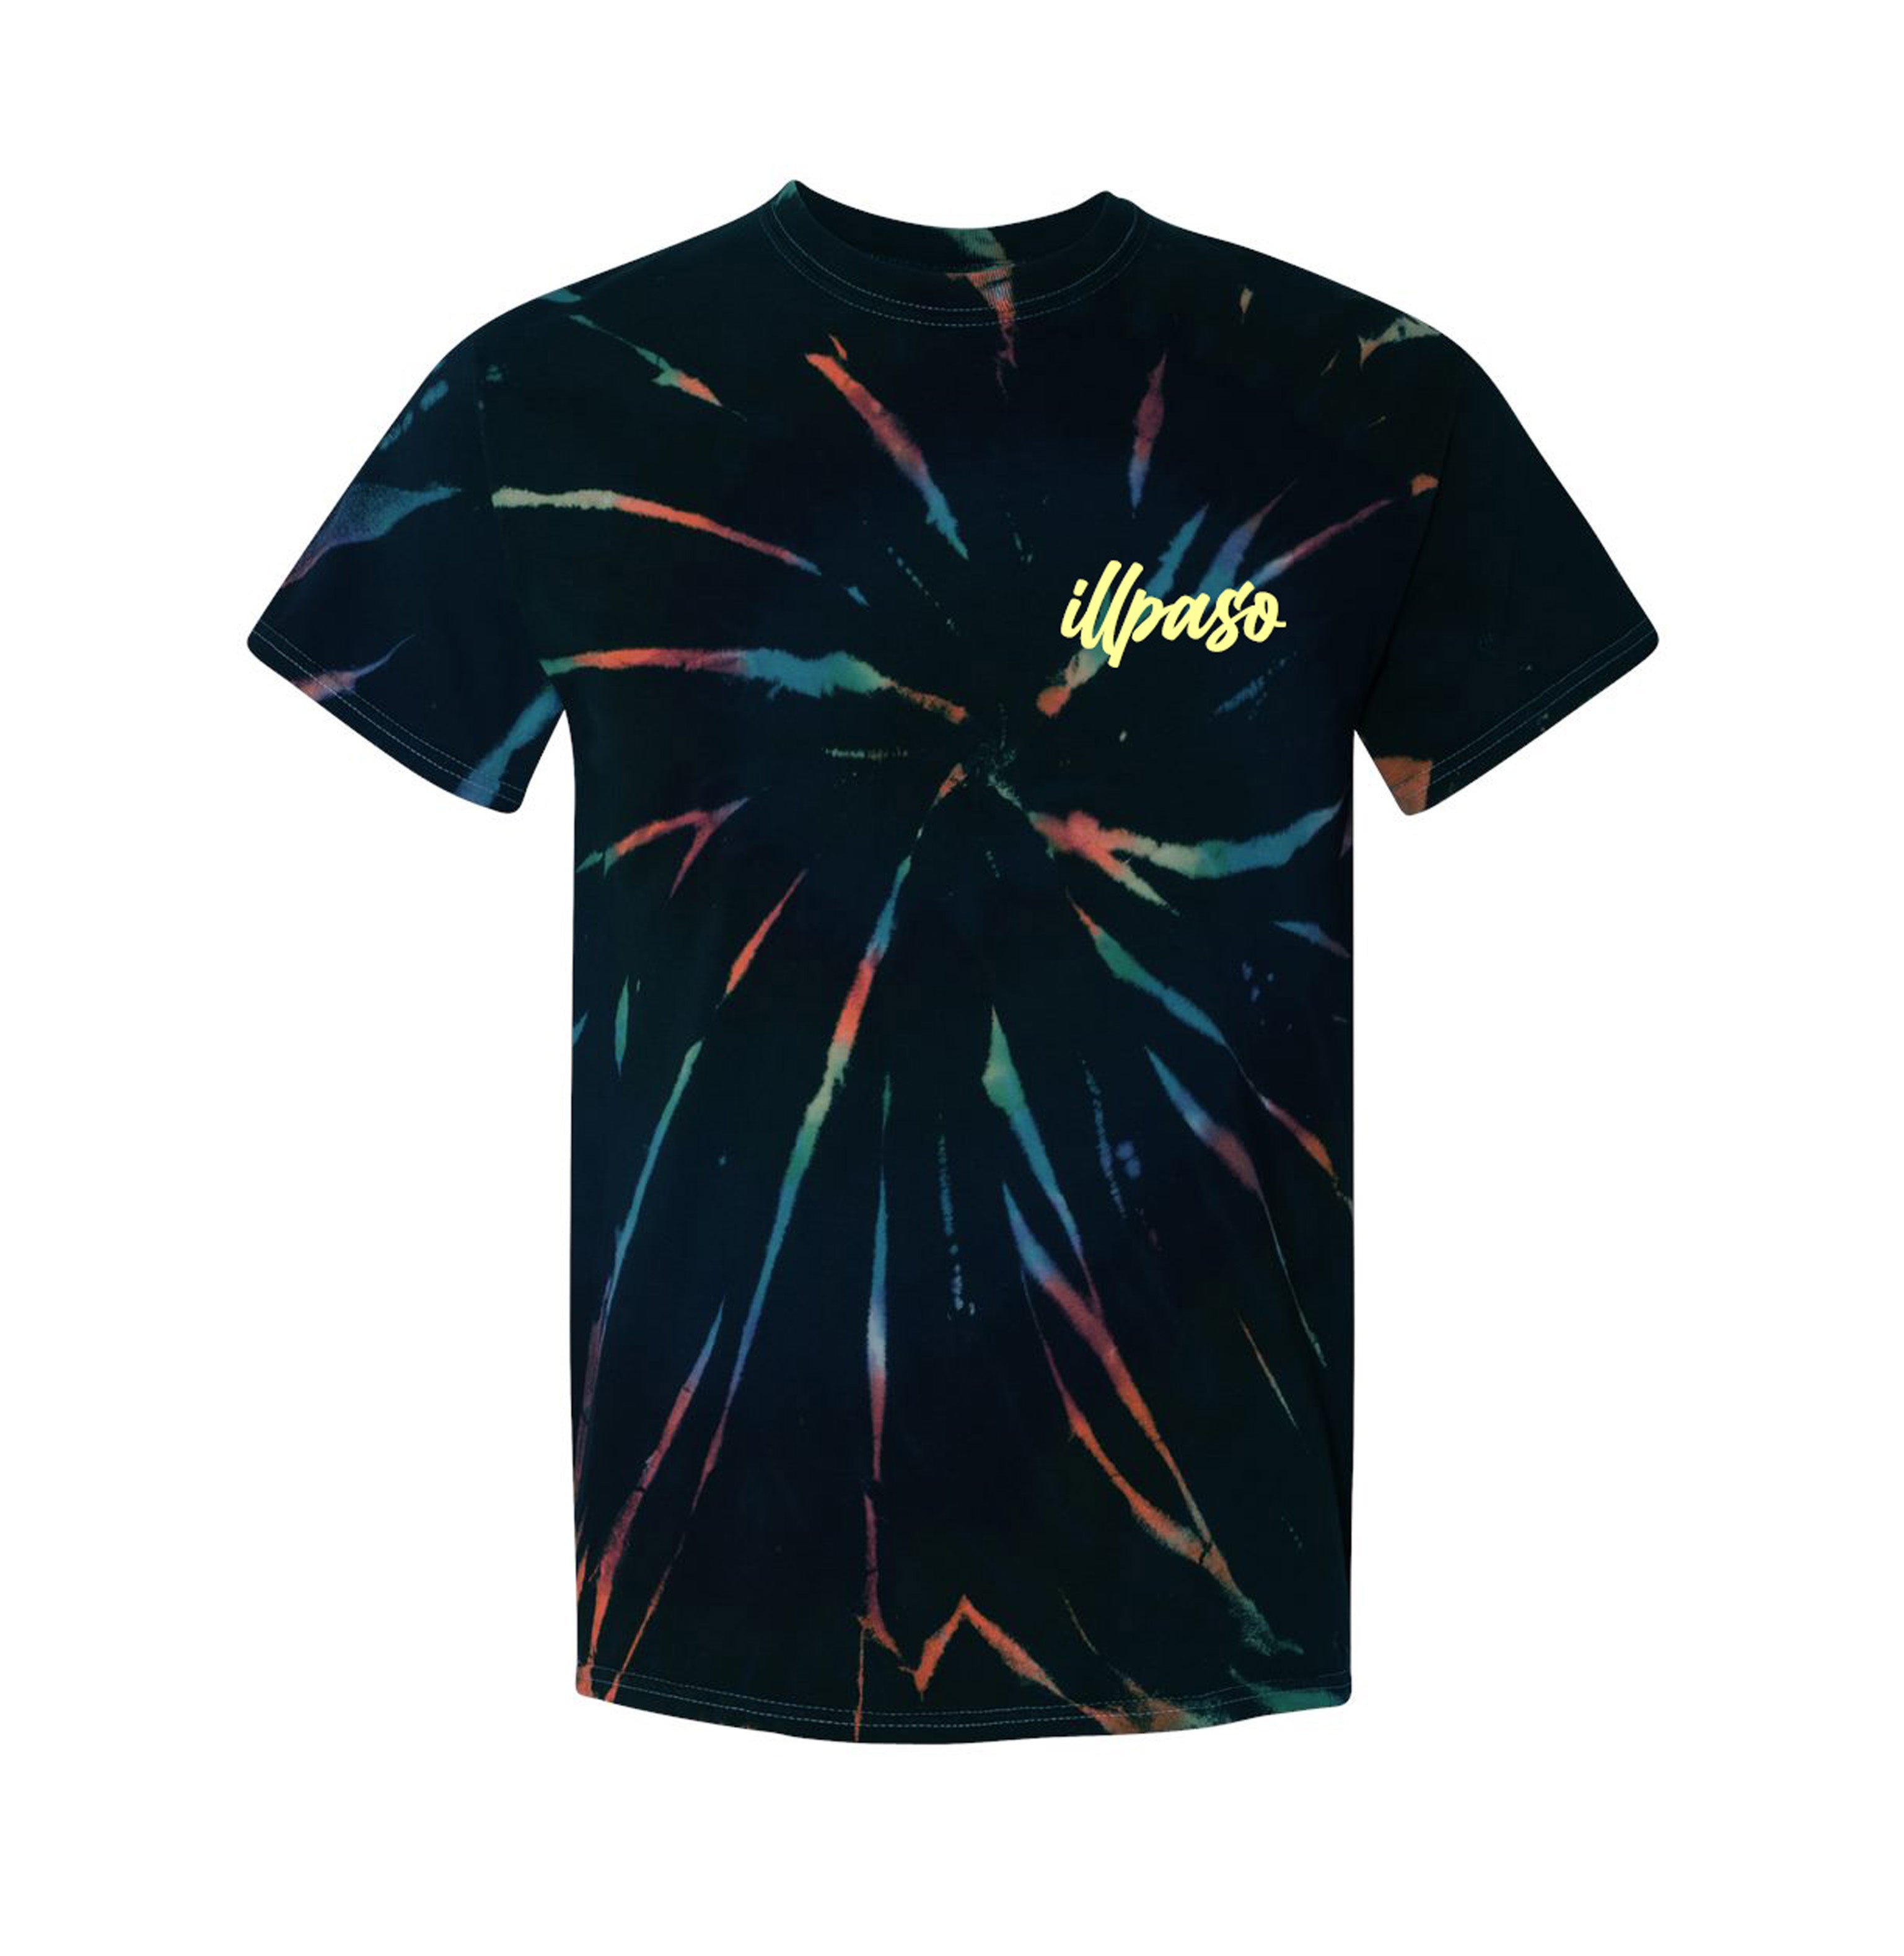 Aurora Multi-Color Spiral Short Sleeve T-Shirt w/ Gold Embroidered Pocket Logo by illpaso